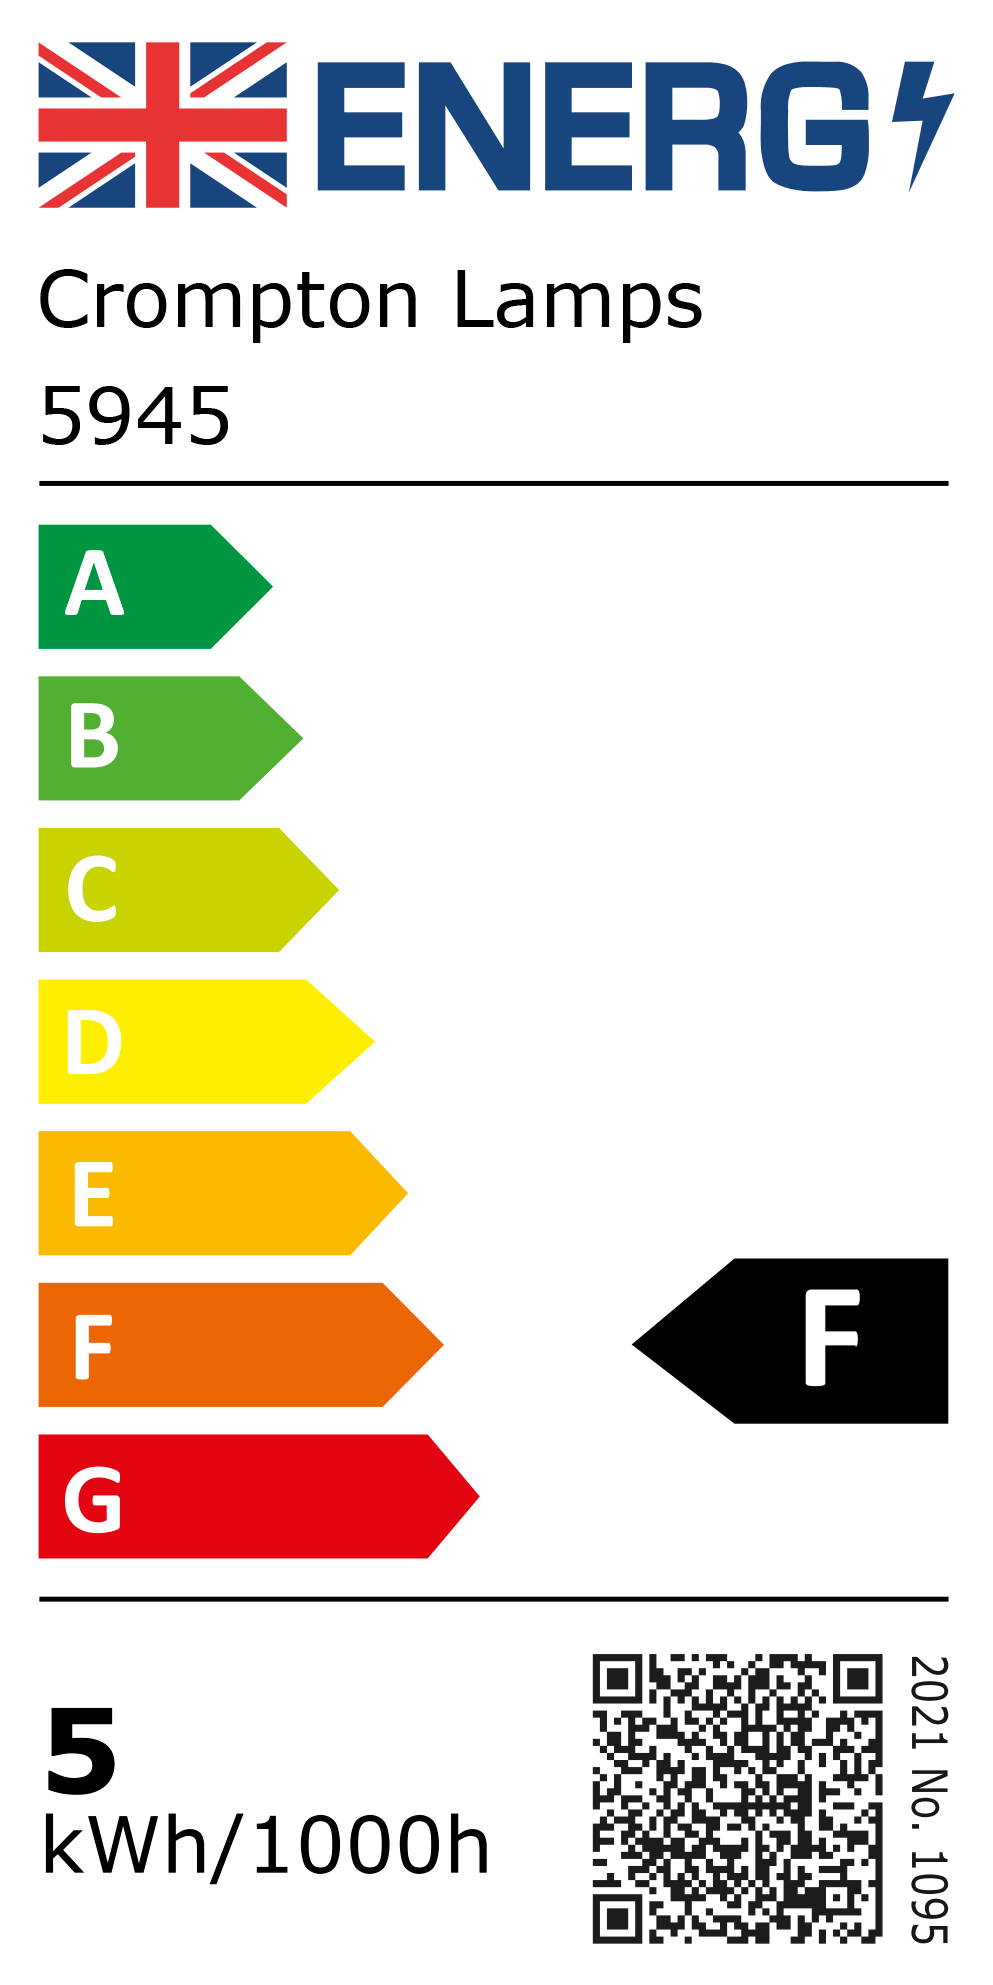 New 2021 Energy Rating Label: Stock Code 5945